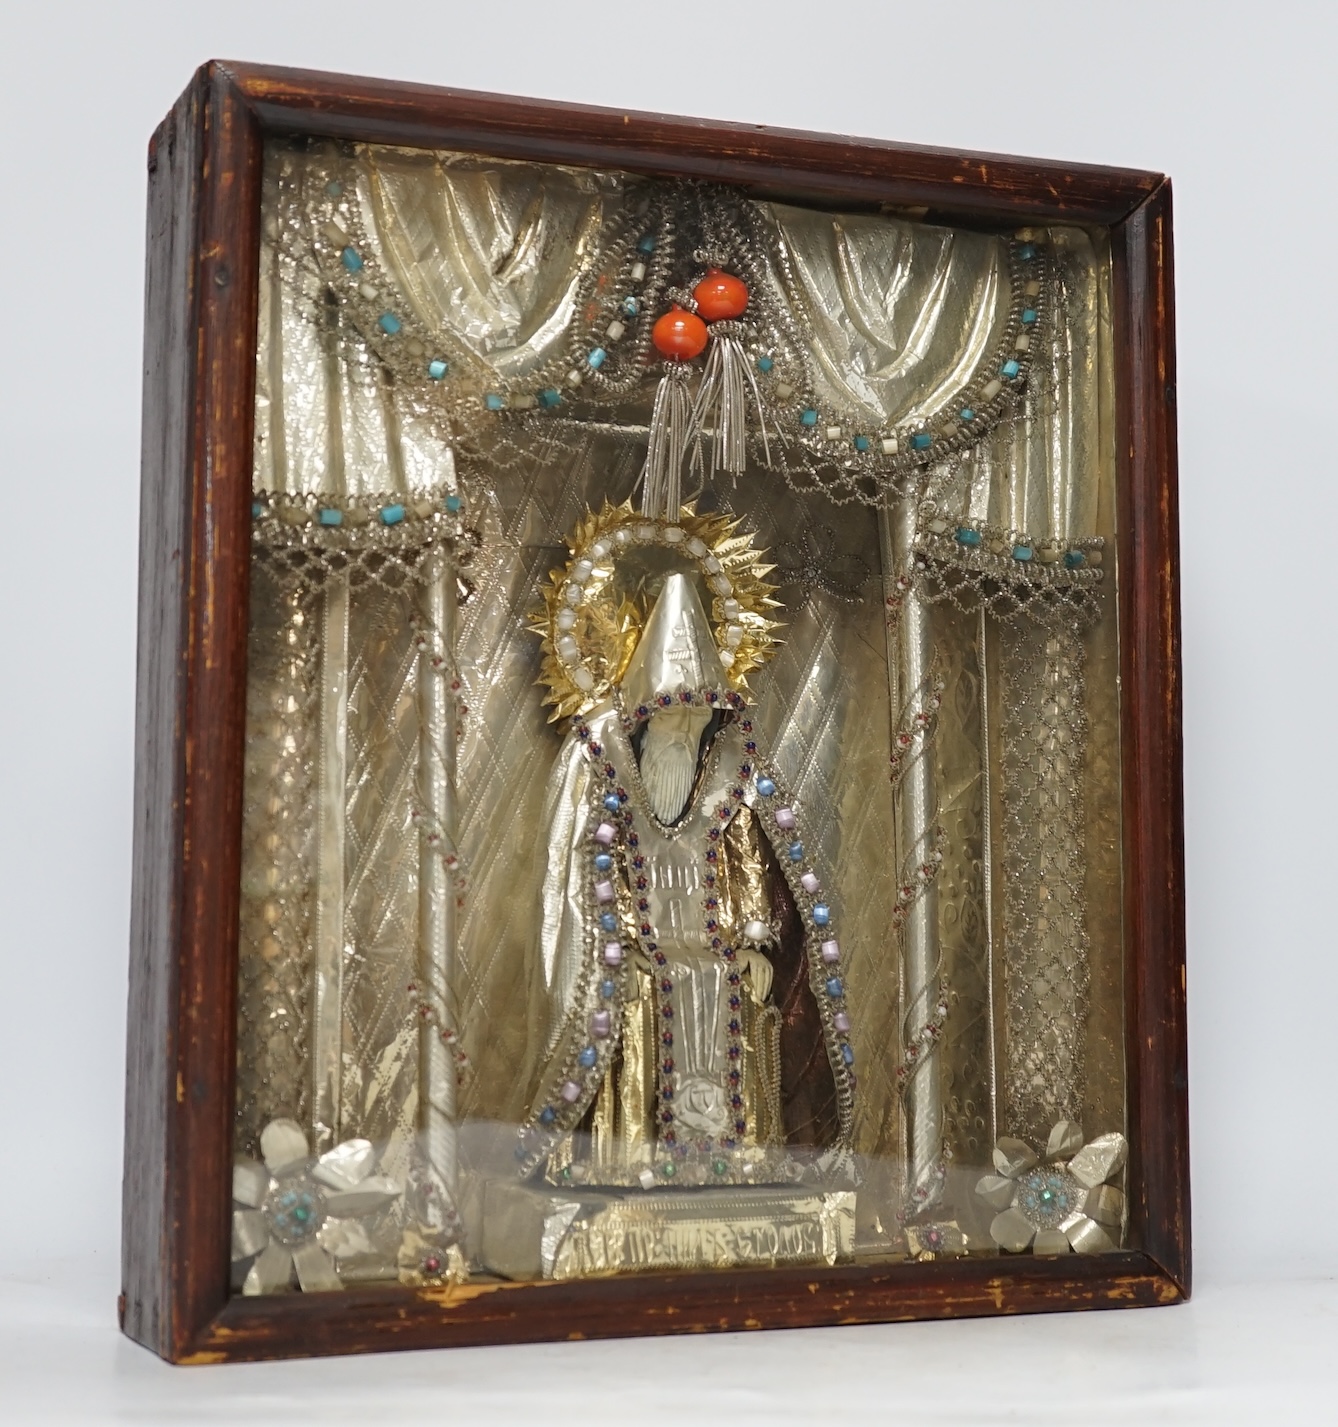 A Russian icon / figurative diorama, ‘Old Believers’, decorated with mixed metals and coloured beadwork, 33cm wide, 37cm high. Condition - case rubbed, good interior